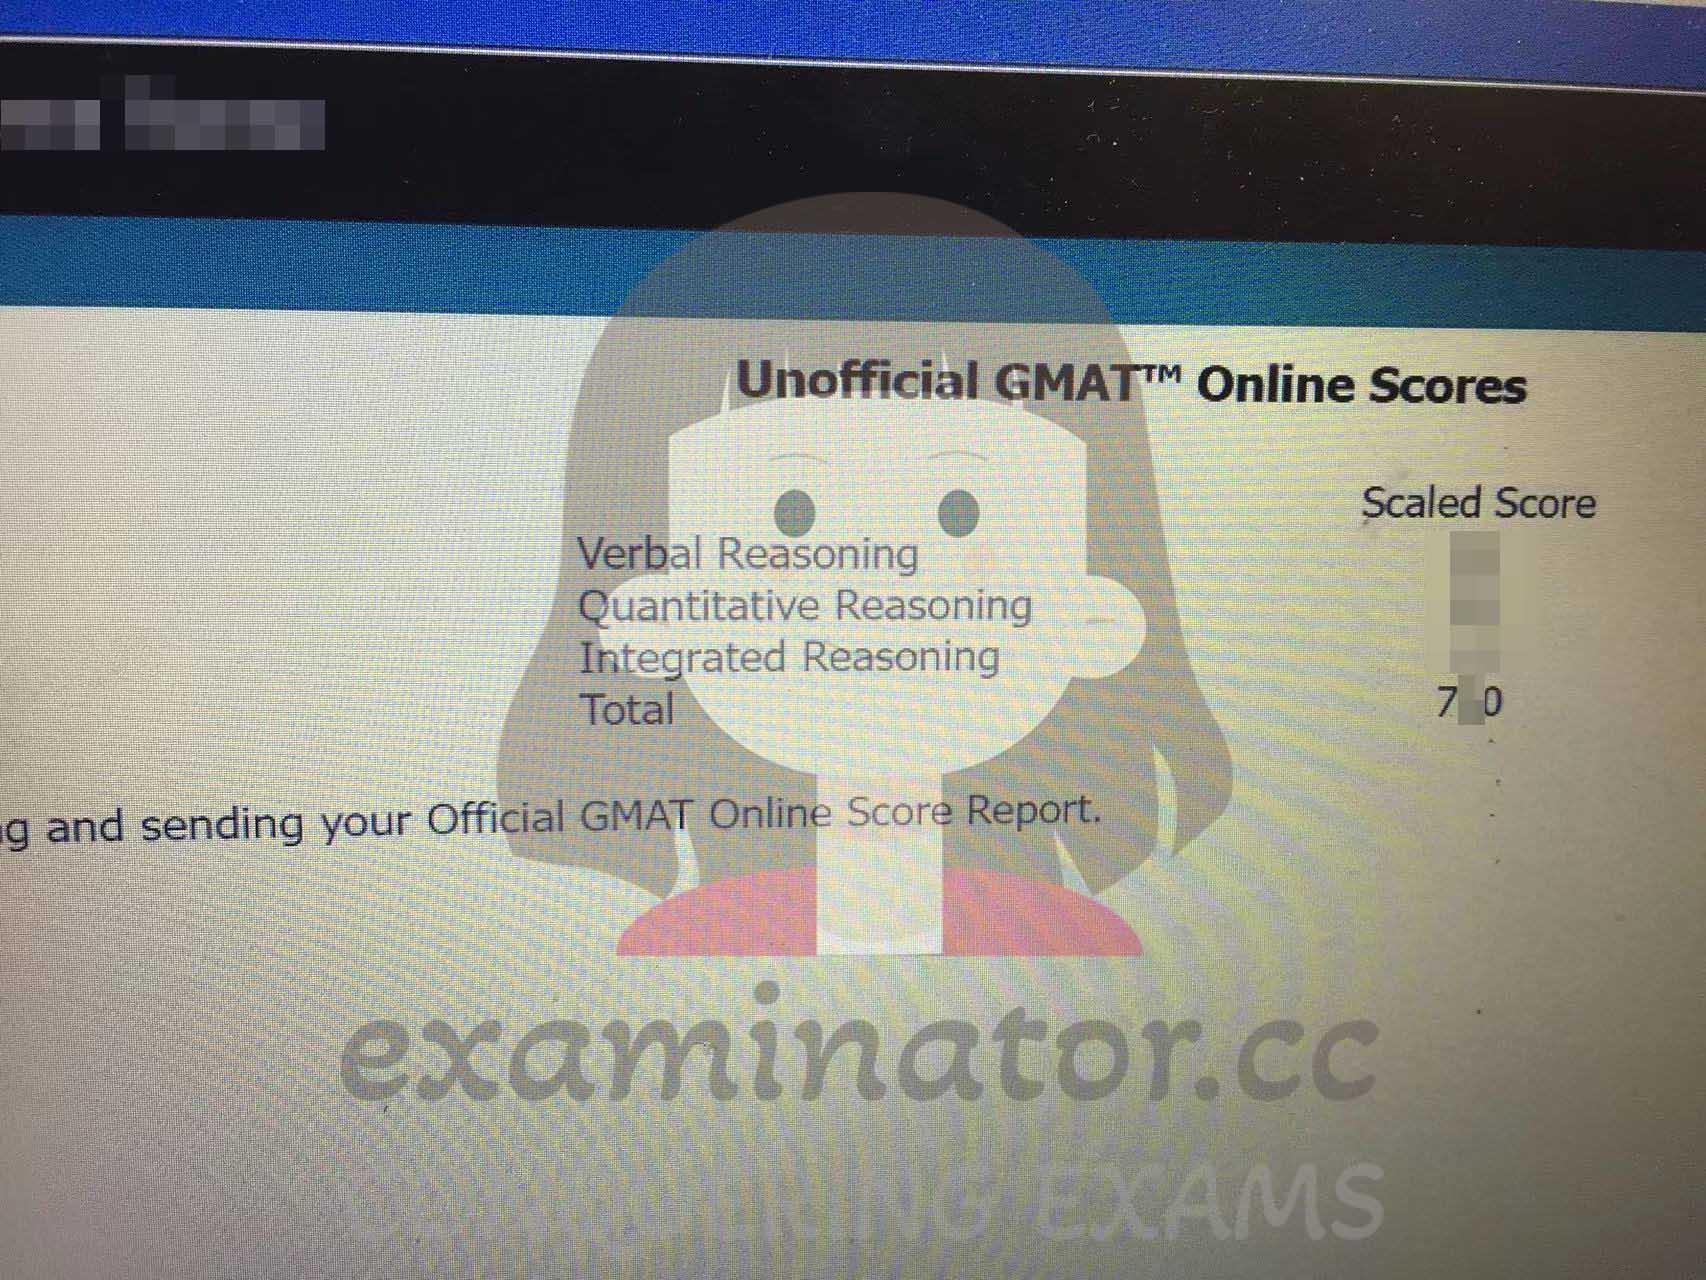 Score image for GMAT Cheating success story #613